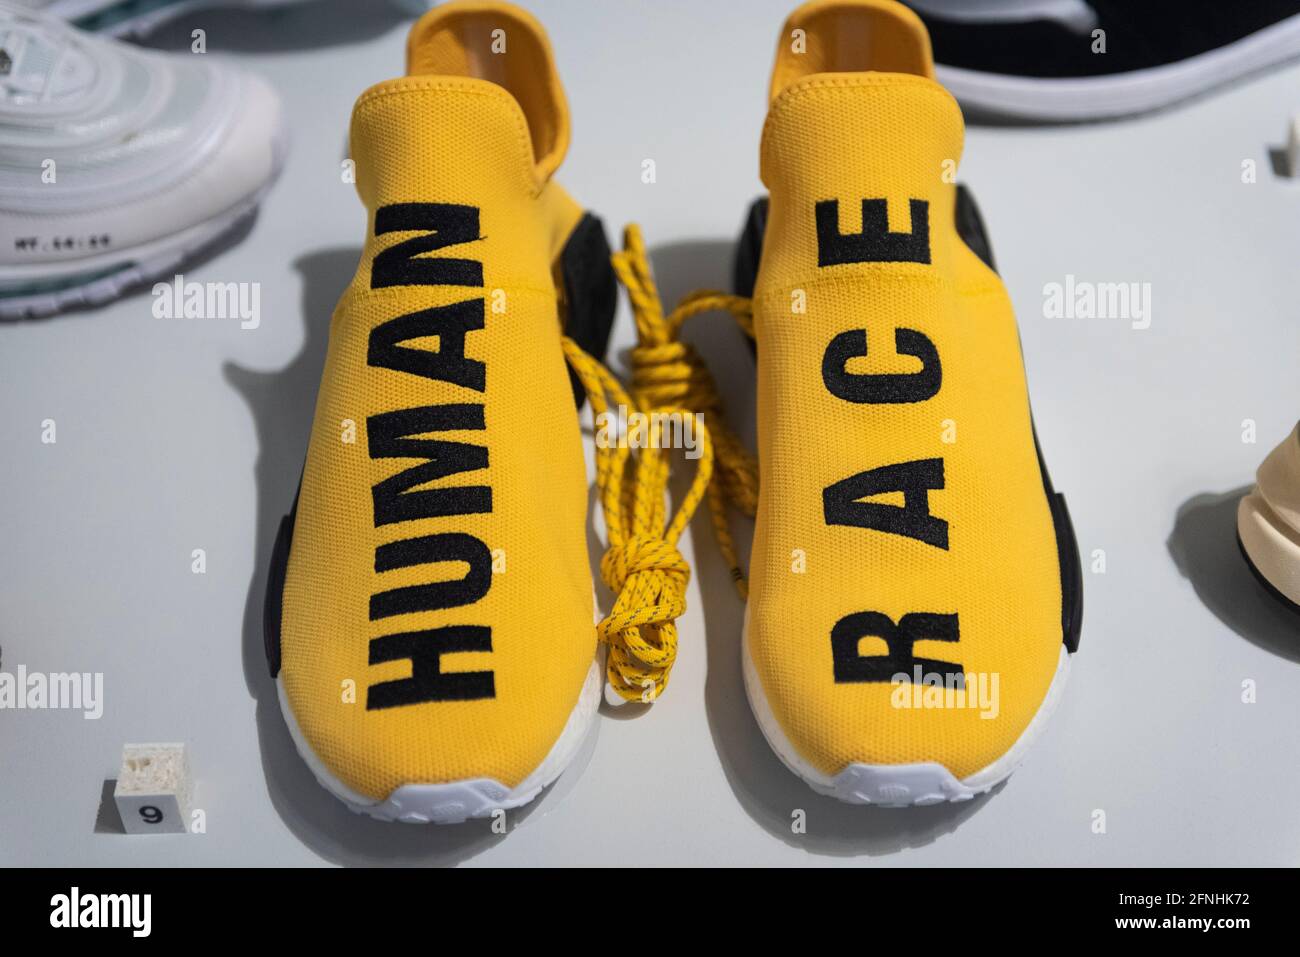 London, UK. 17 May 2021. Adidas NMD HU Pharrell Human Race "Yellow", 2016, a collaboration between Adidas and musician Pharrell Williams. Preview of Unboxed: Studio Street” at the Design Museum